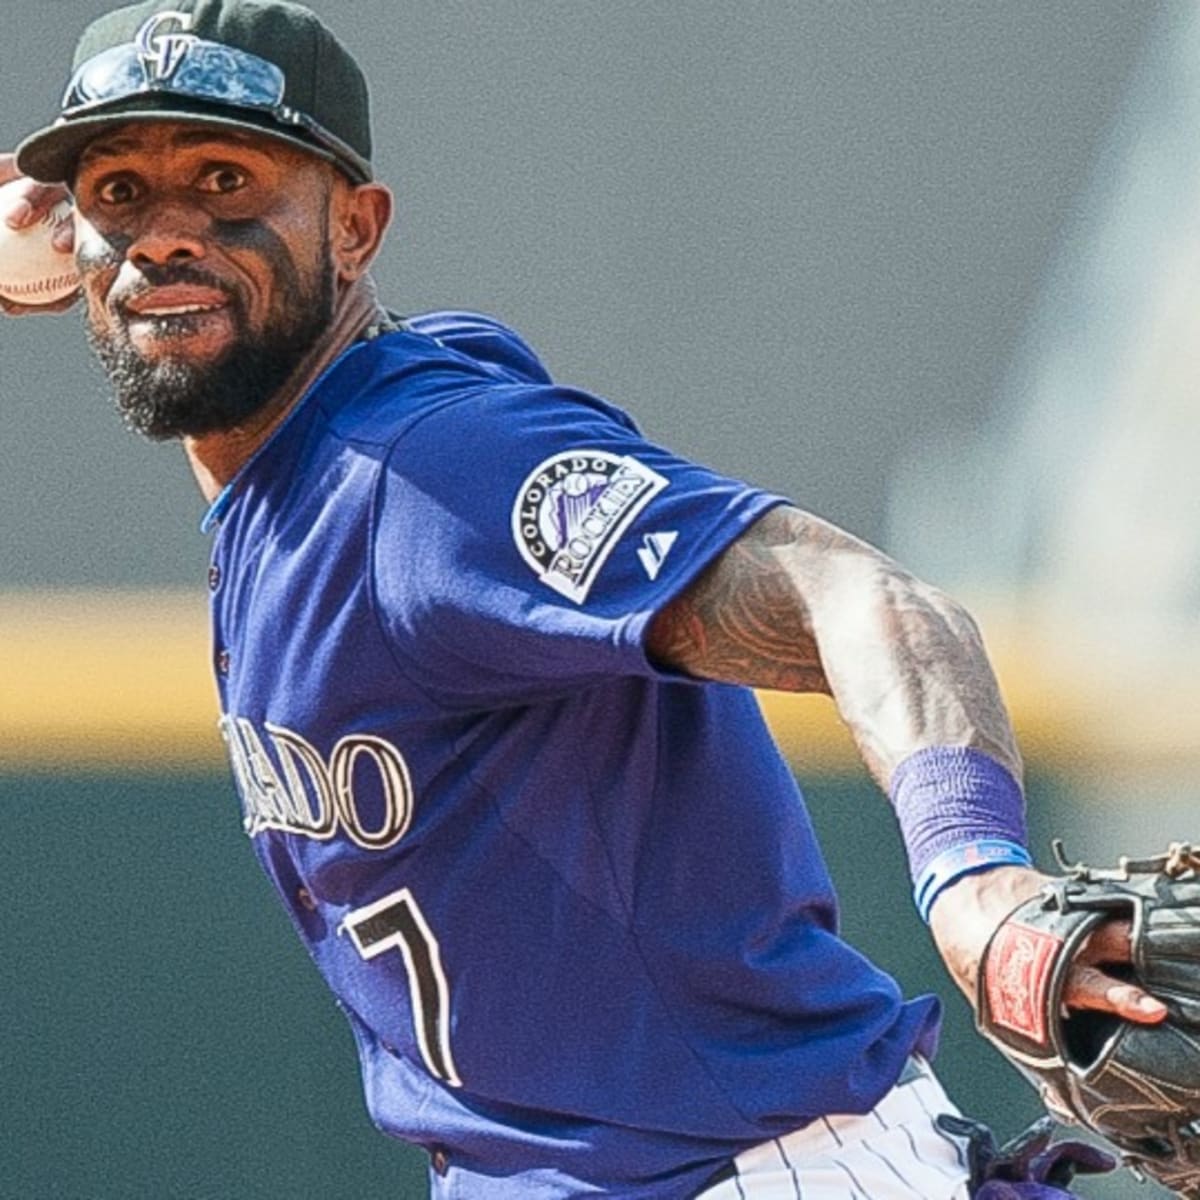 Jose Reyes drawing interest from Royals, according to former teammate – The  Denver Post